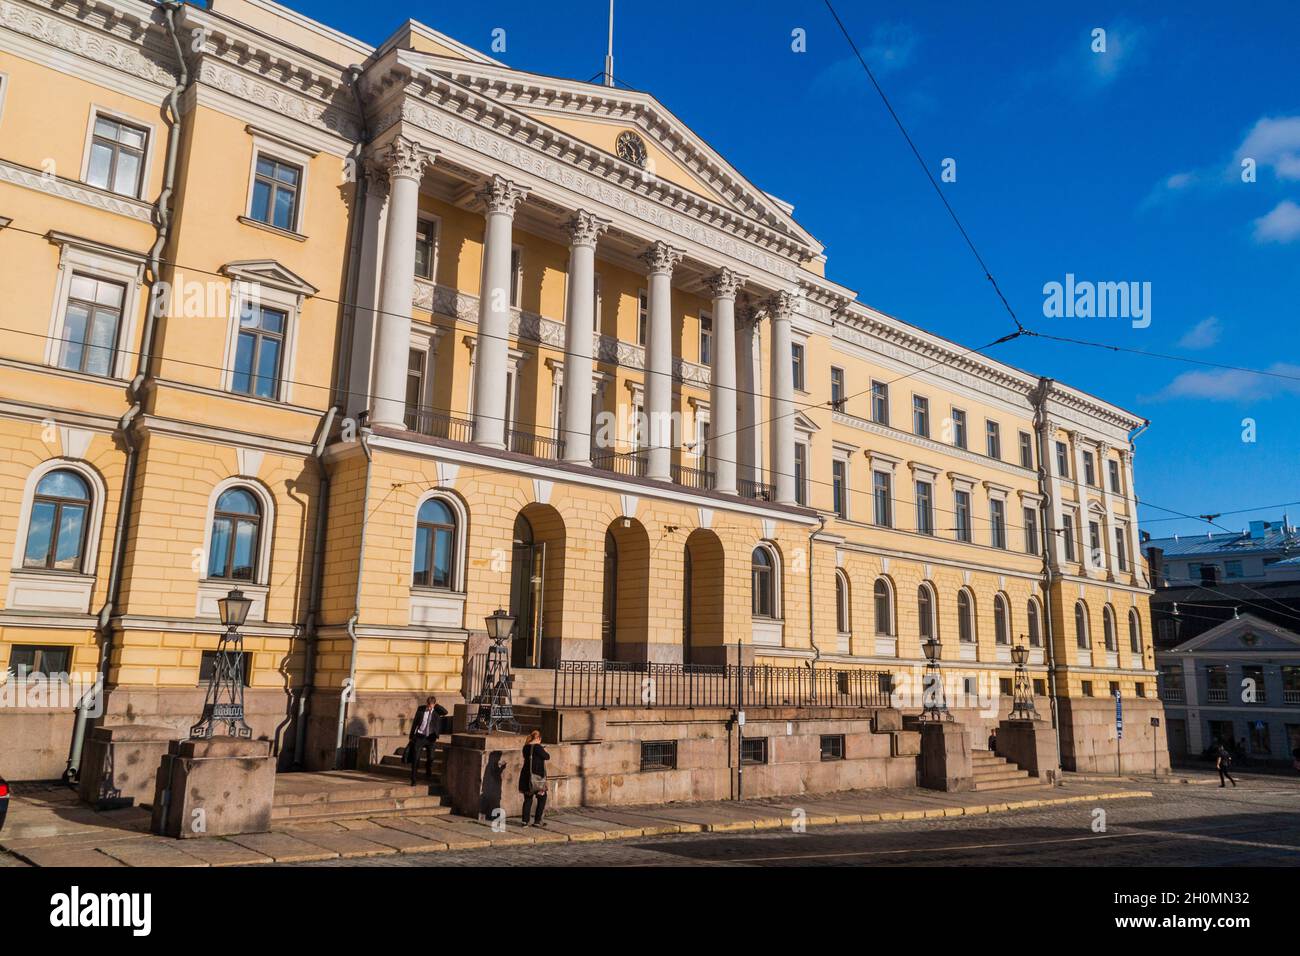 HELSINKI, FINLAND - AUGUST 24, 2016: Yellow colored columned Government Palace on the Senate Square in Helsinki Stock Photo